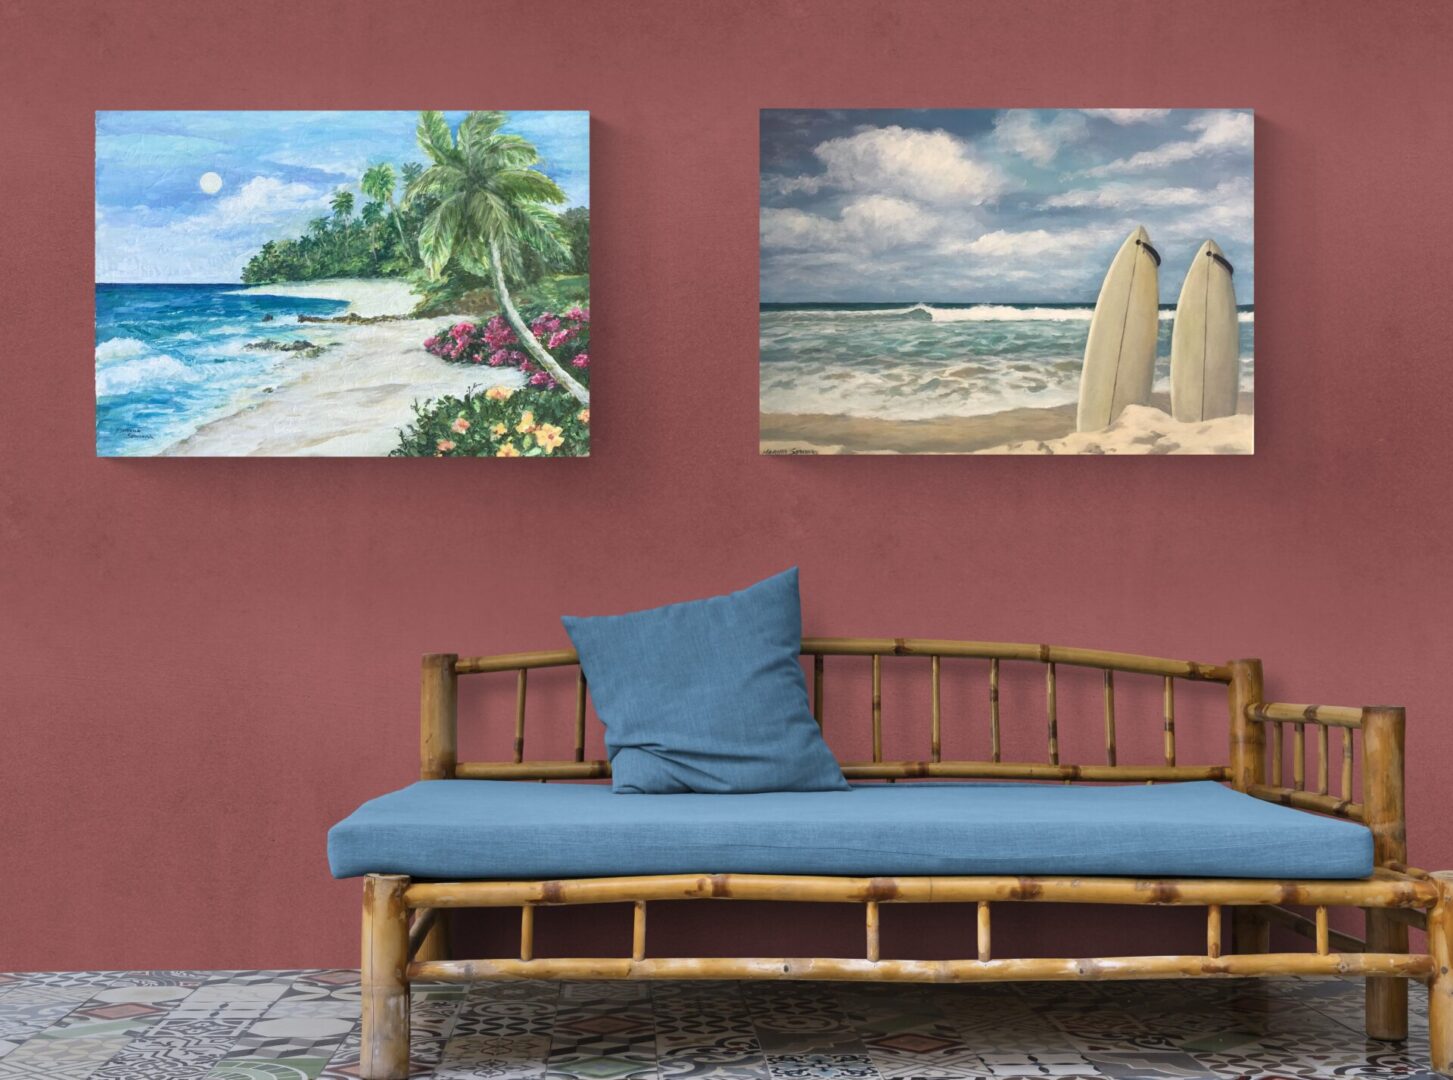 Local Fine Art For Sale: Two paintings of surfboards on a couch in front of a red wall.